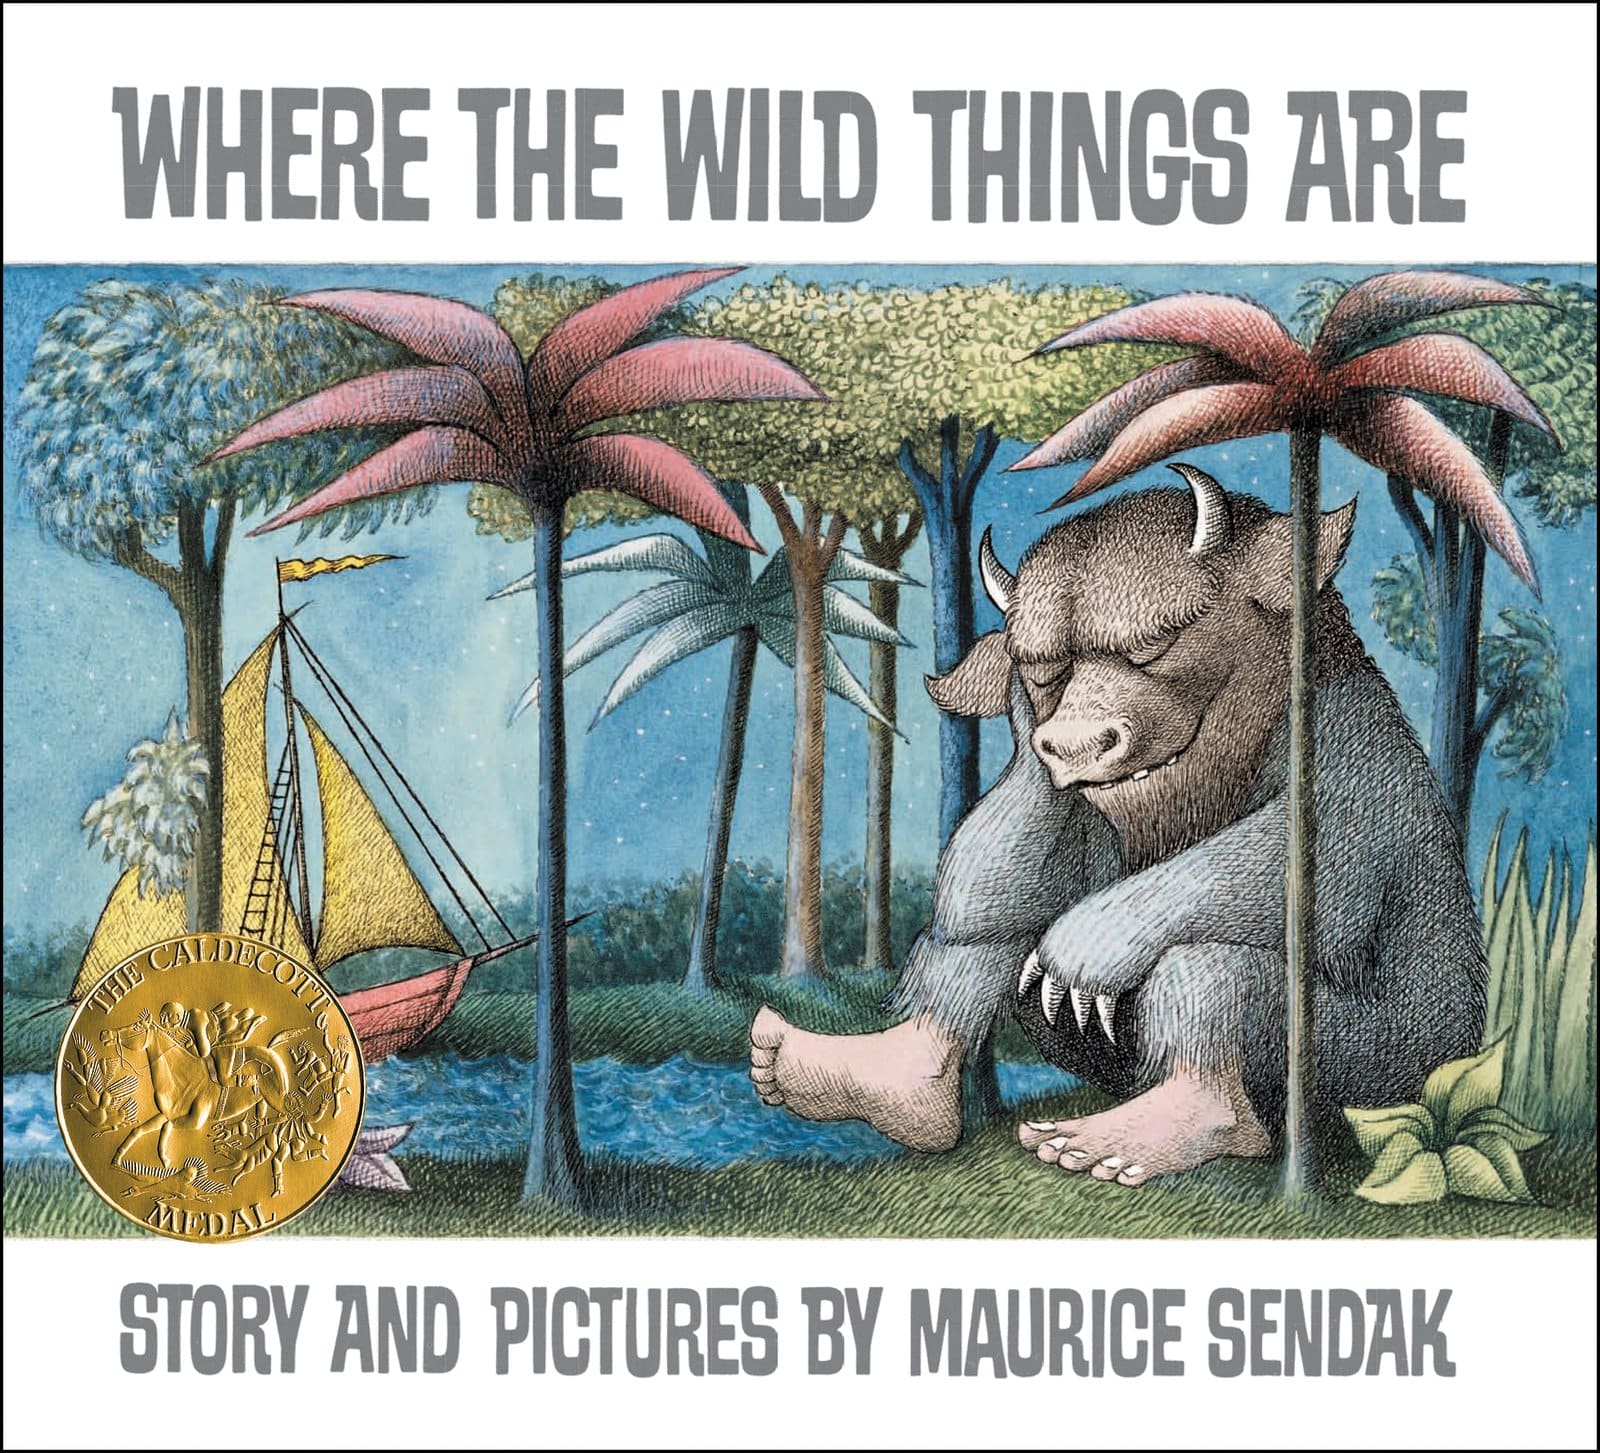 IMG : Where the wild things are